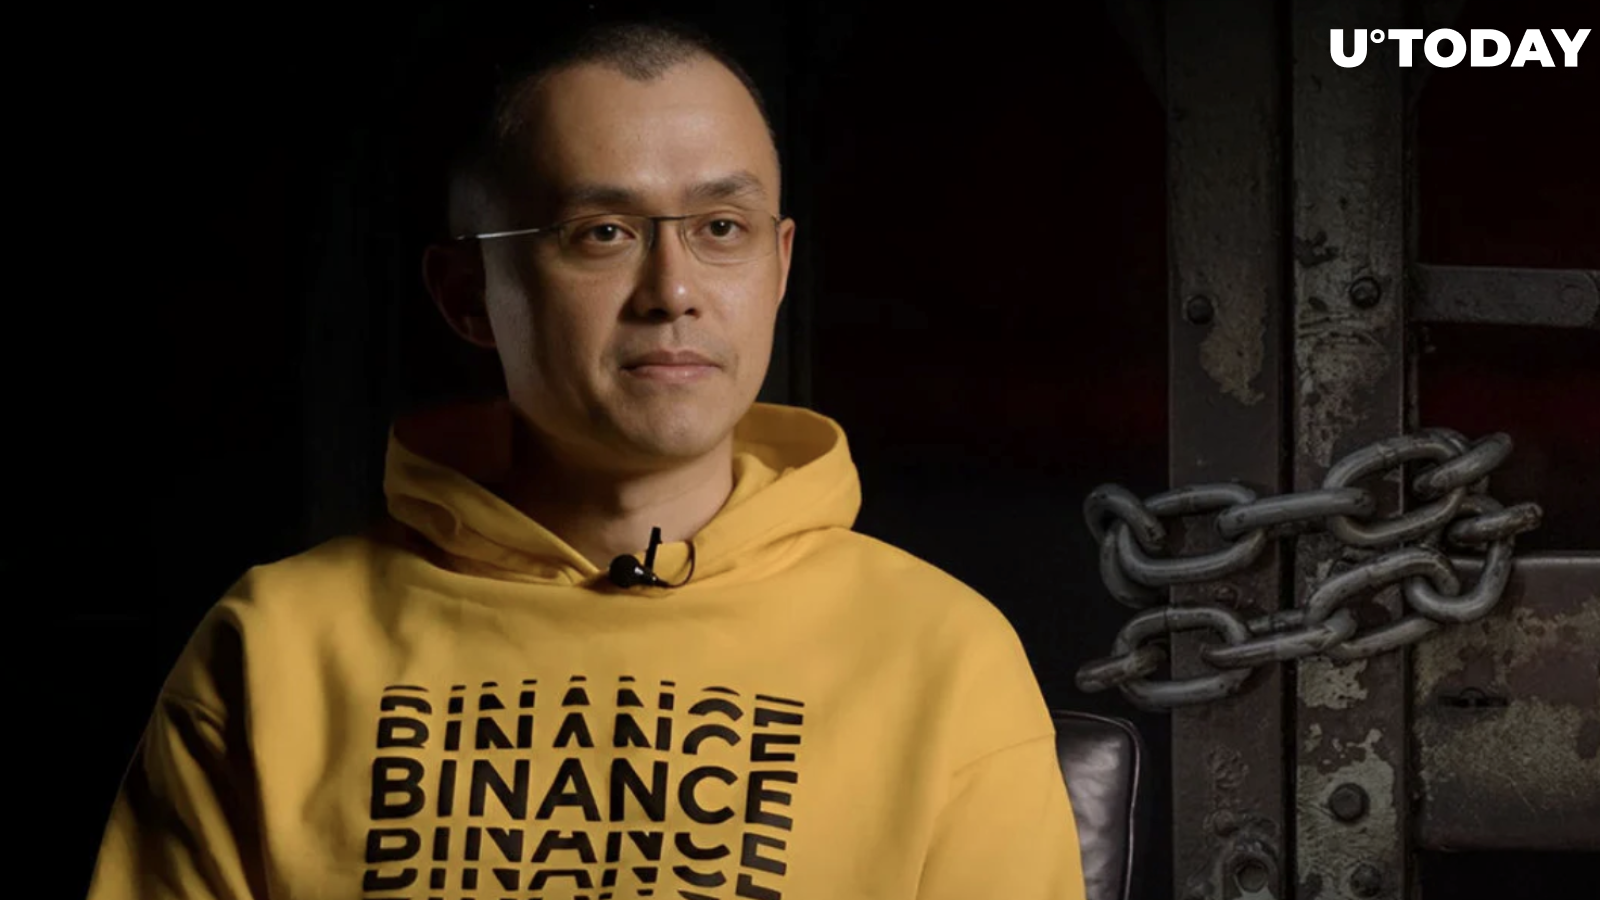 Binance Founder CZ Could Be Sentenced to Years in Prison Tomorrow